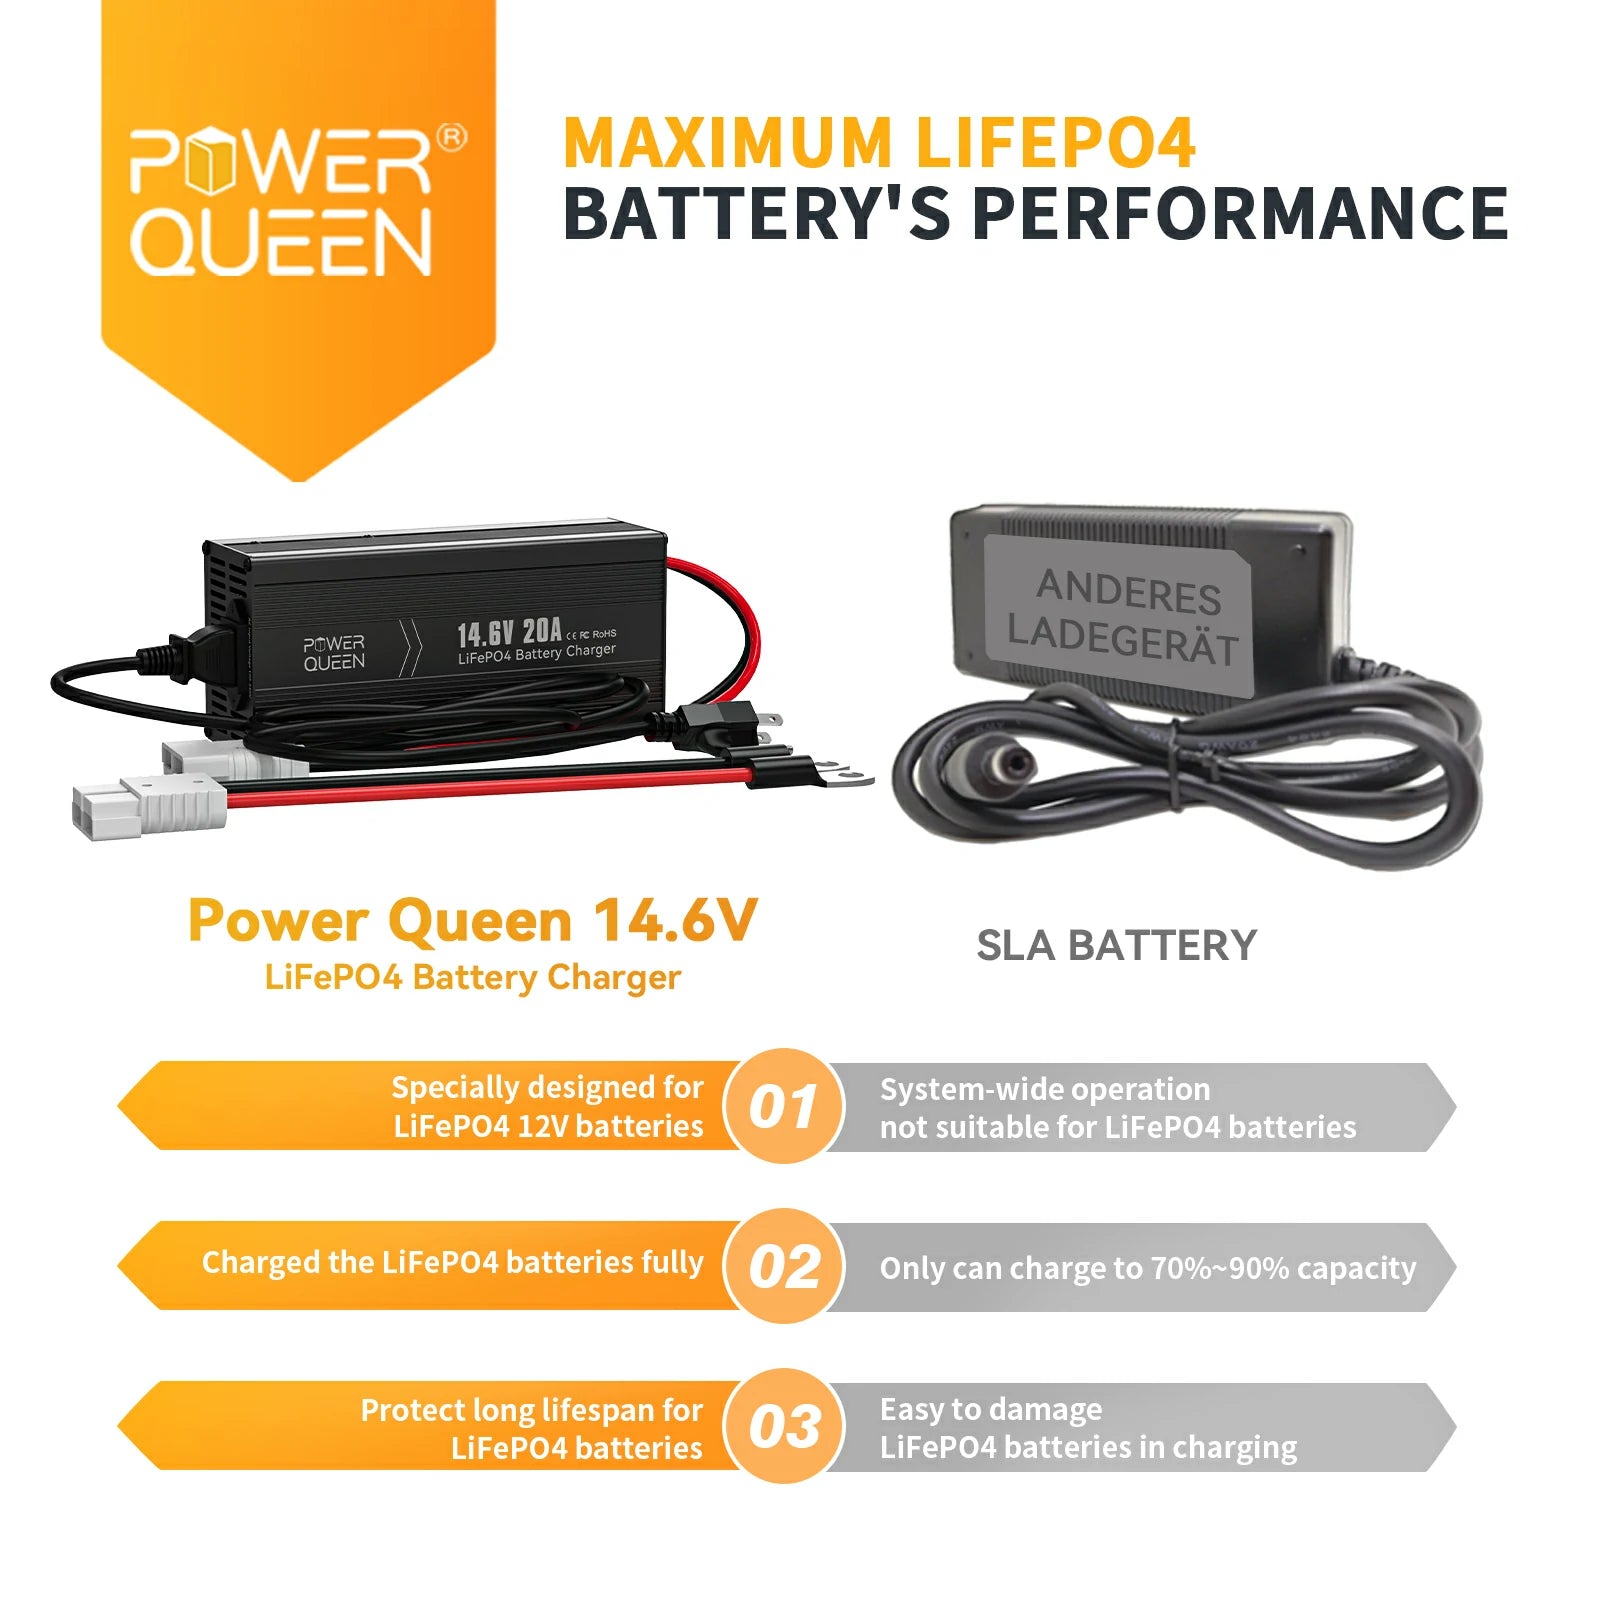 Power Queen 14.6V 20A LiFePO4 Battery Charger for 12V LiFePO4 Battery